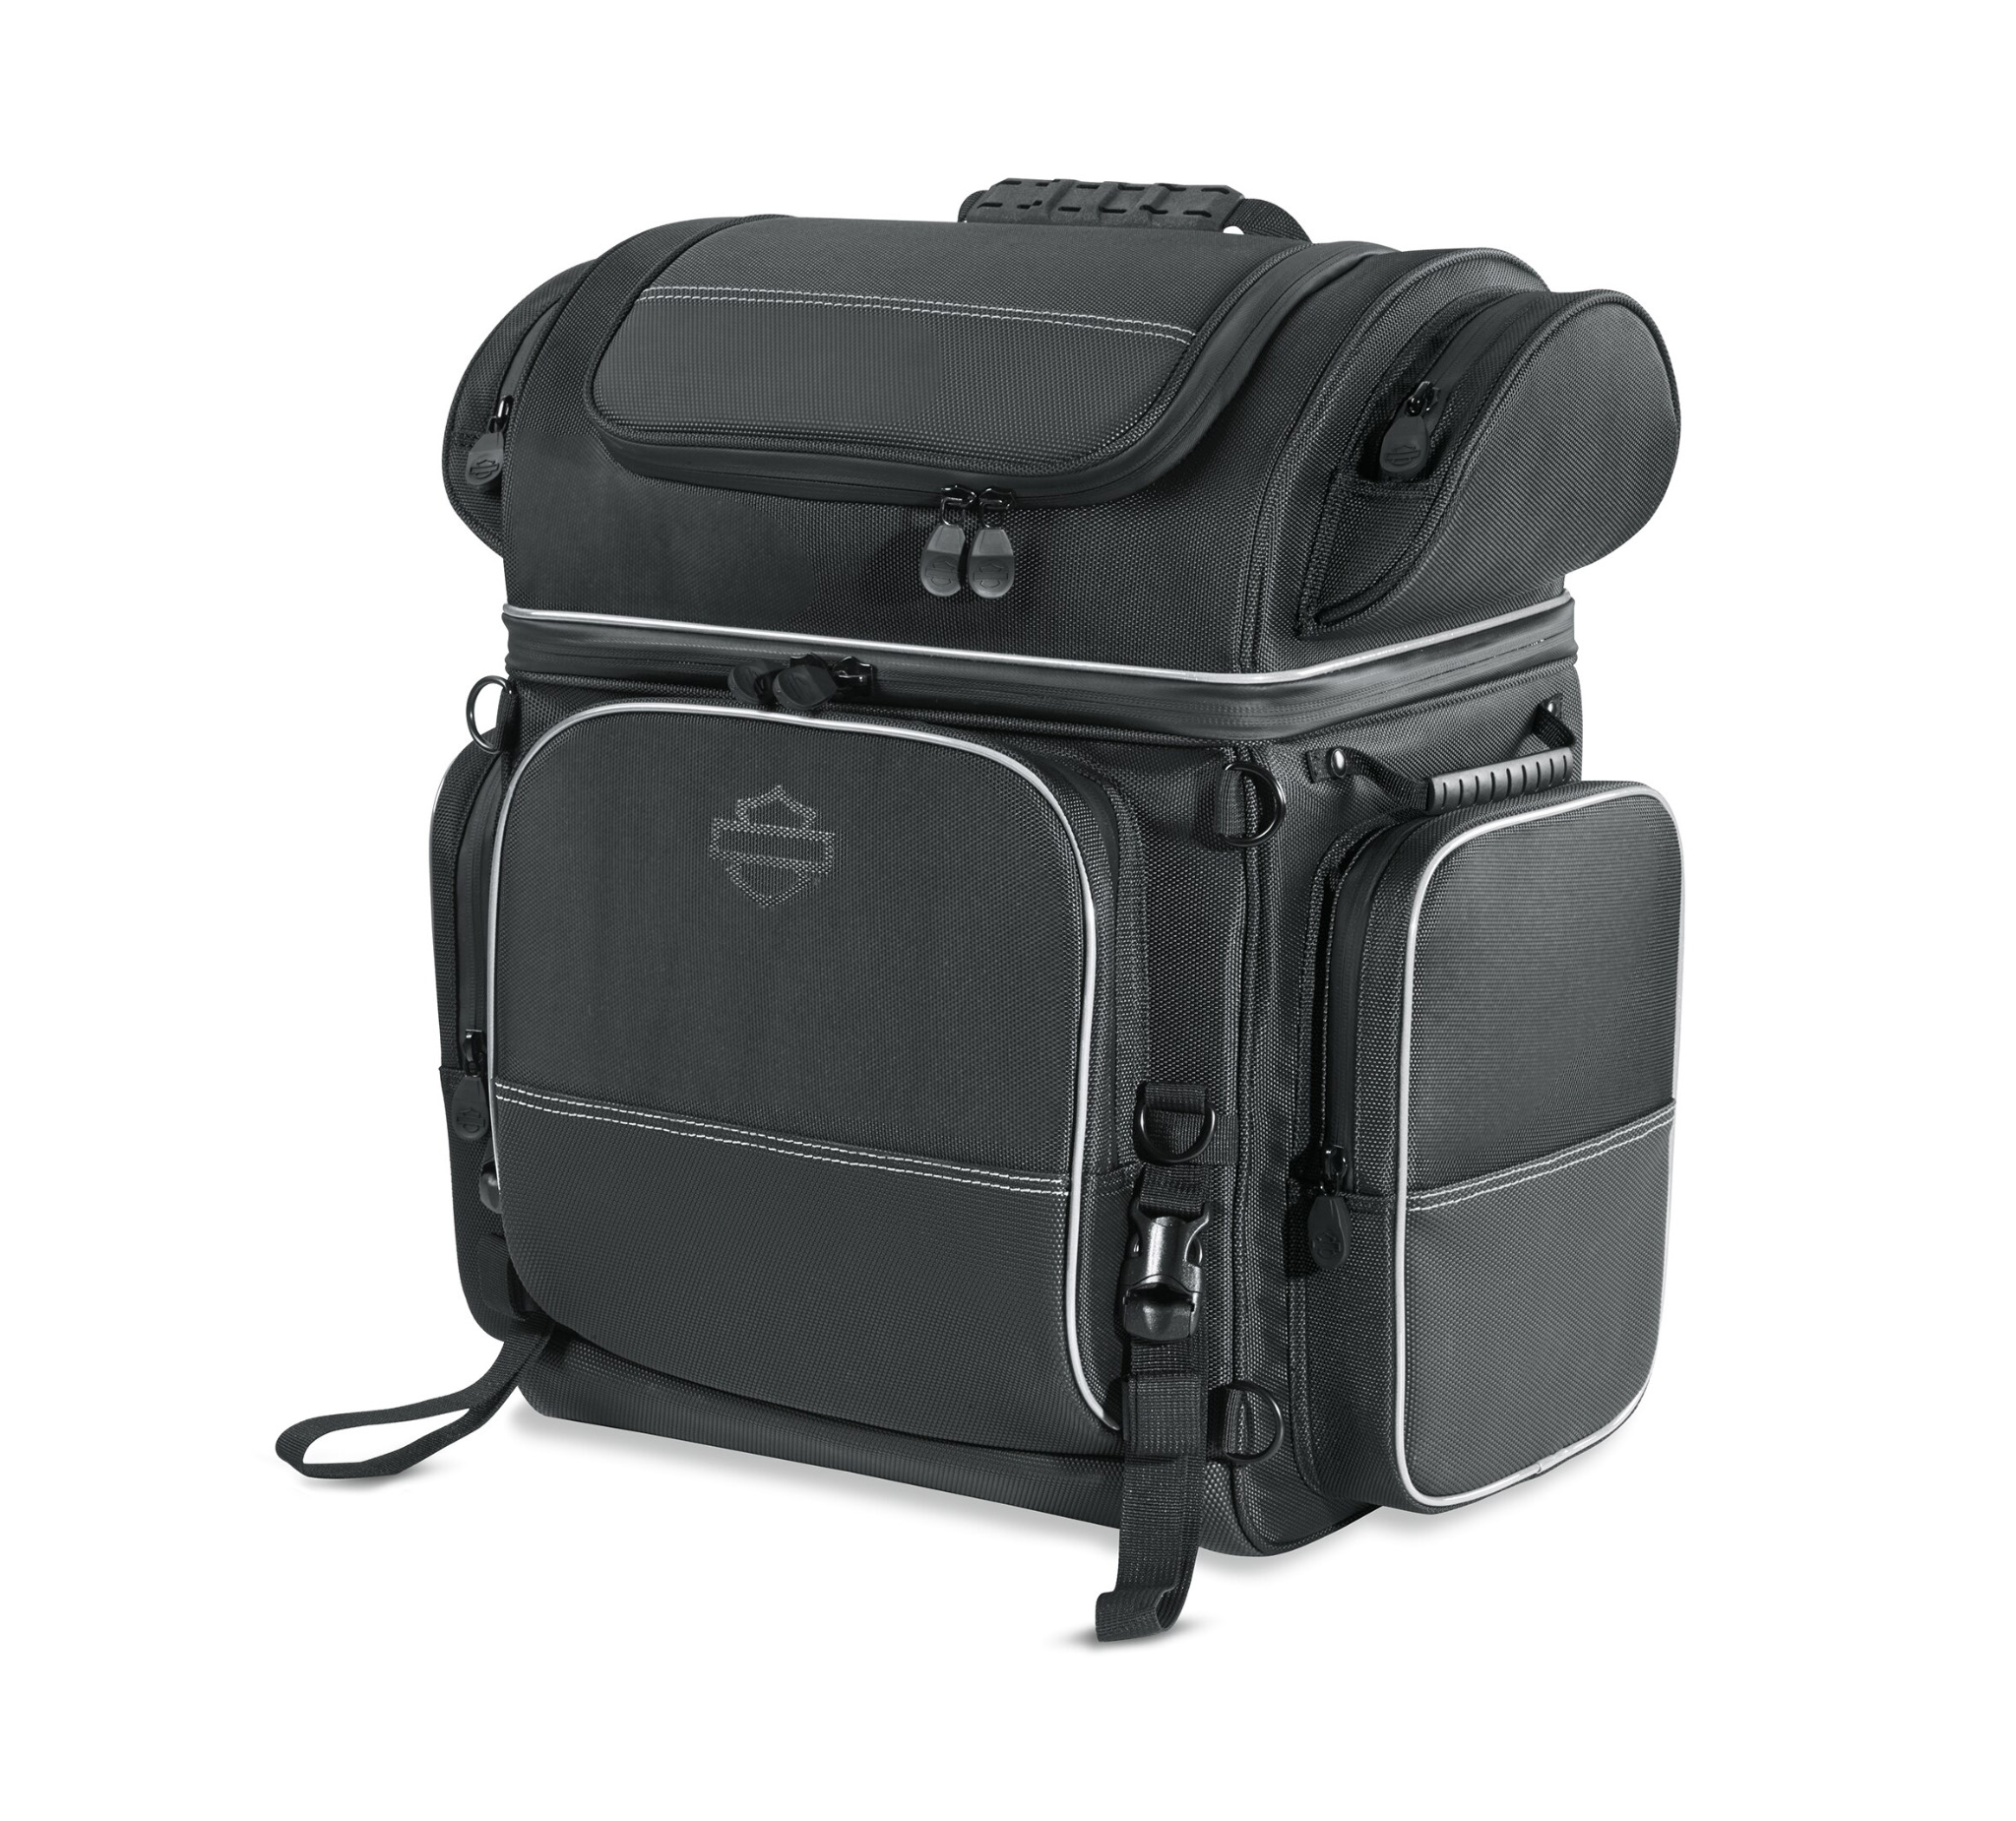 2018 SPORTSTER Forty-Eight XL1200X Motorcycle Bags, Luggage 